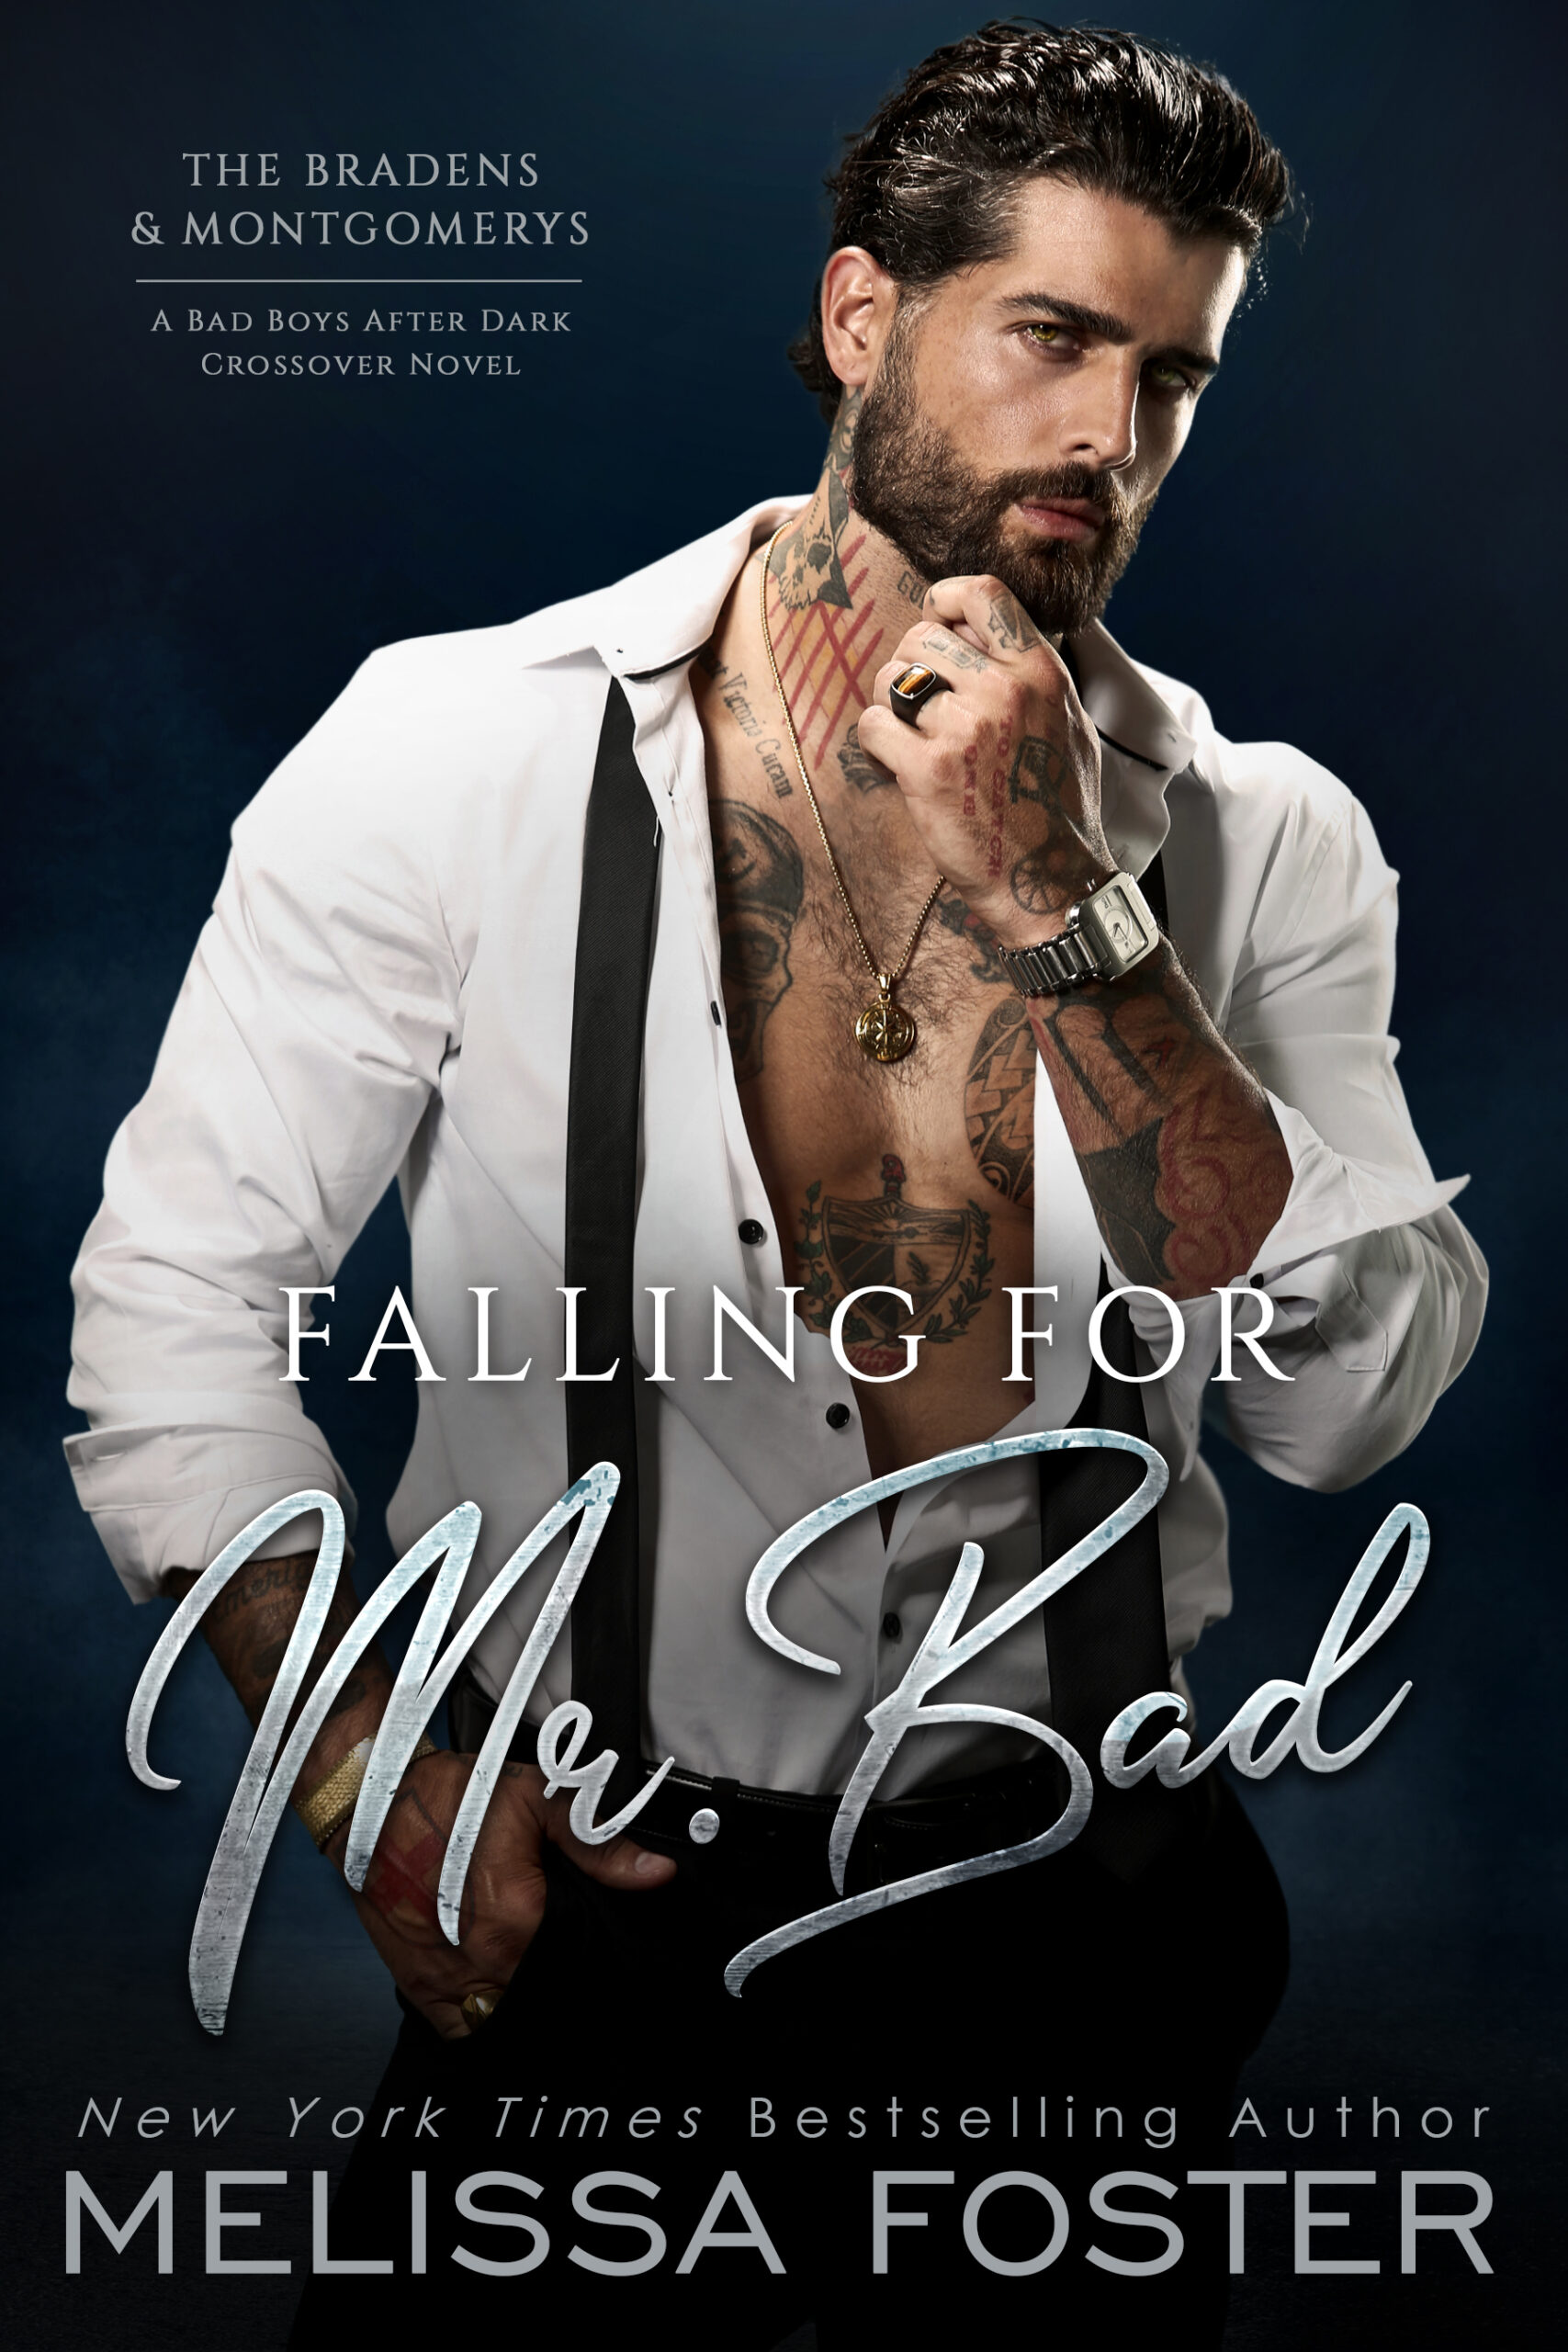 Falling for Mr. Bad by Melissa Foster